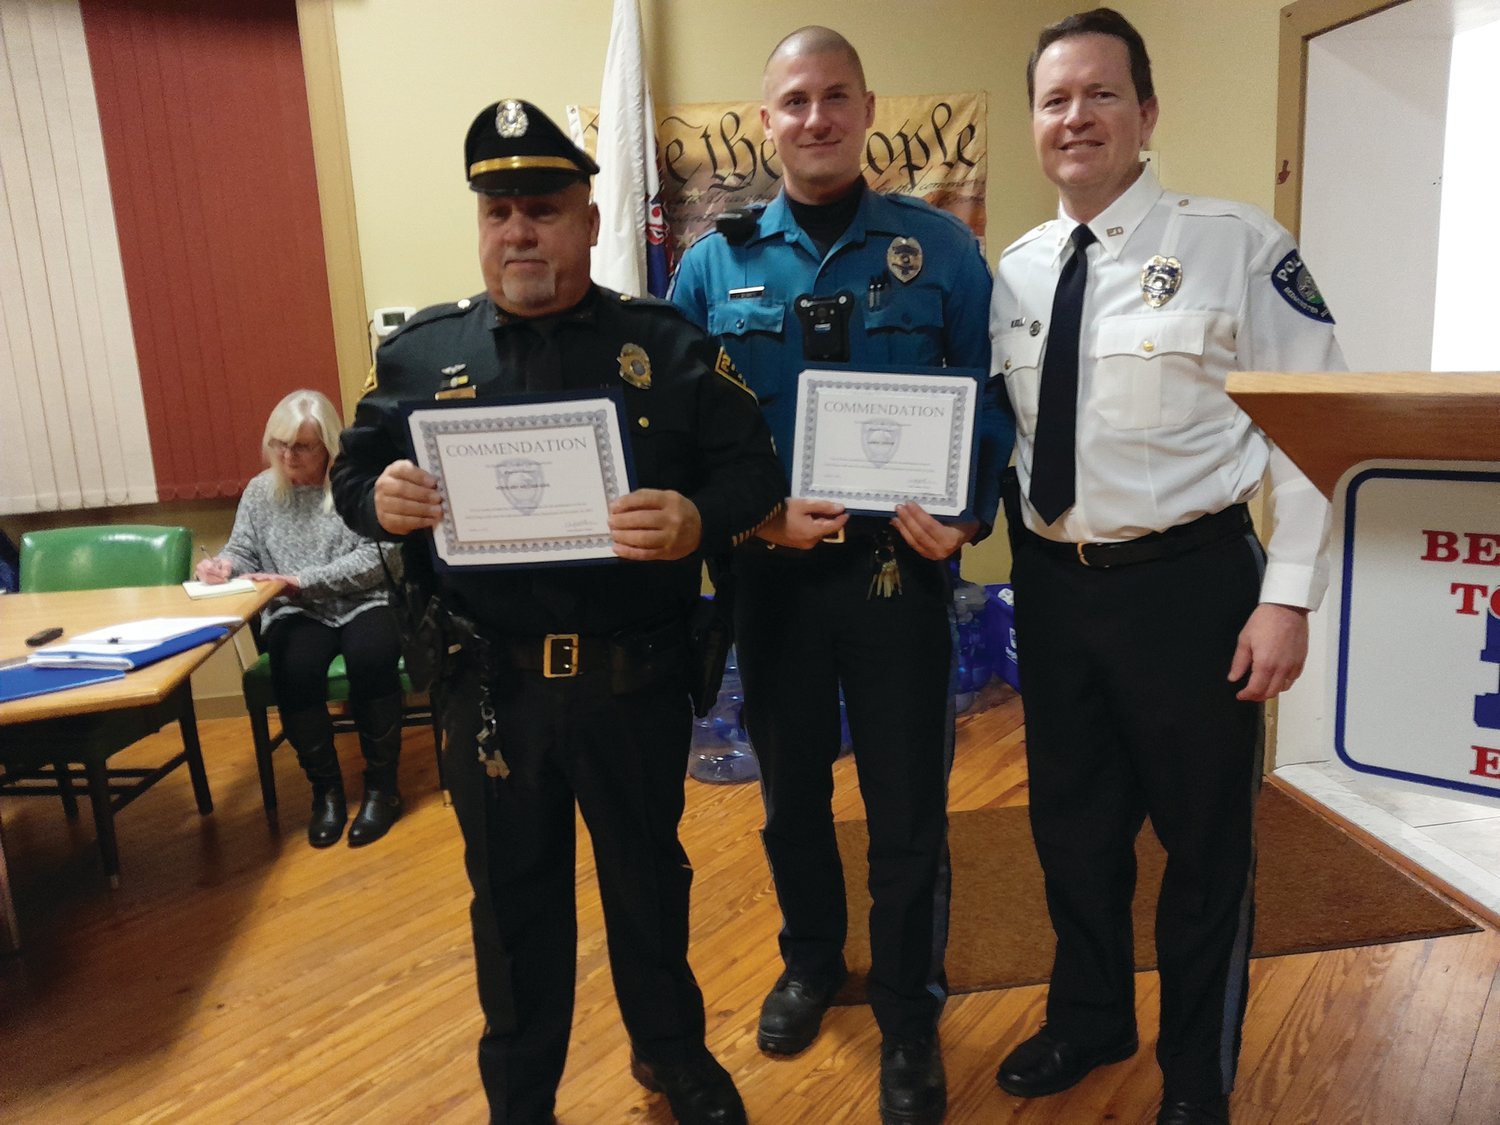 Dublin Borough Sgt. William Kirk, left, and Bedminster Township Police Officer James Zukow, center, were honored at the Jan. 11 Bedminster supervisors meeting by Bedminster Police Chief Matt Phelan for aiding a baby who’d stopped breathing while at a local supermarket.